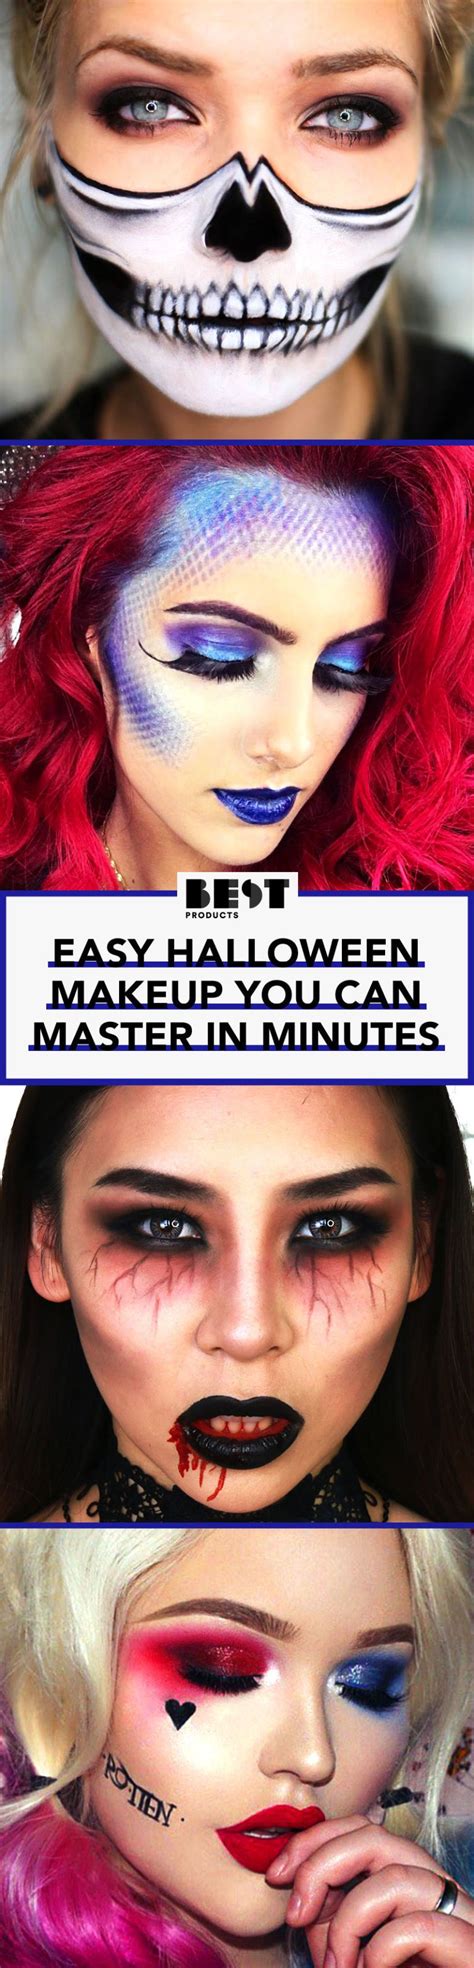 Easy Halloween Makeup Ideas You Can Master In Minutes Halloween Makeup Easy Halloween